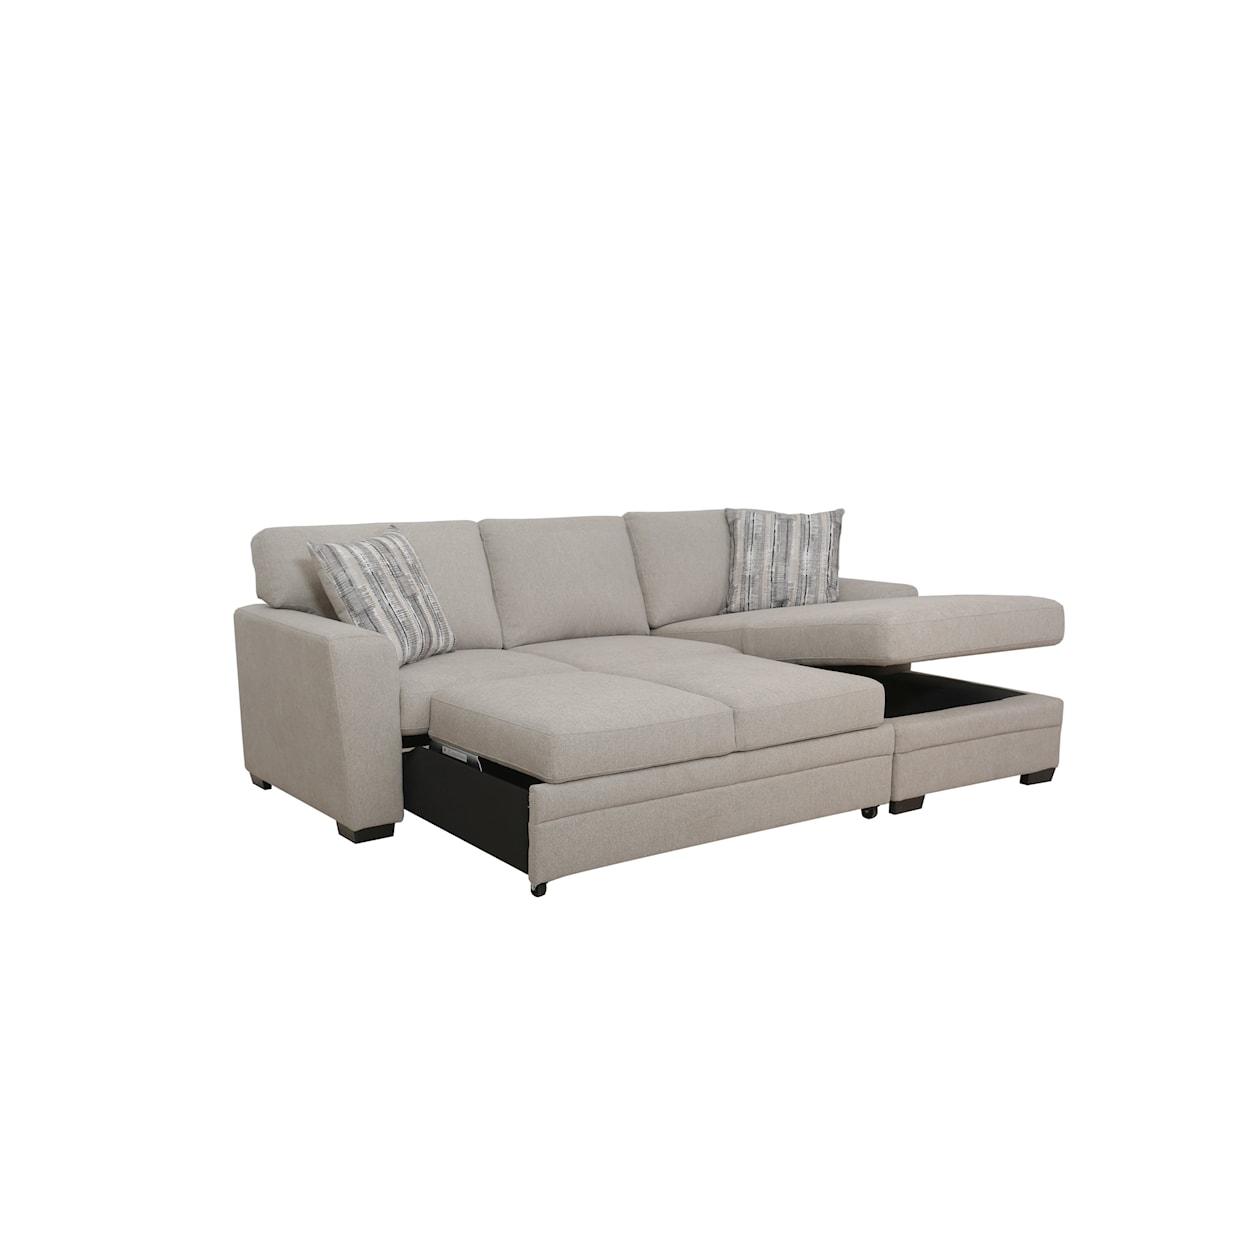 Warehouse M 9602 2-PIECE CHAISE SECTIONAL